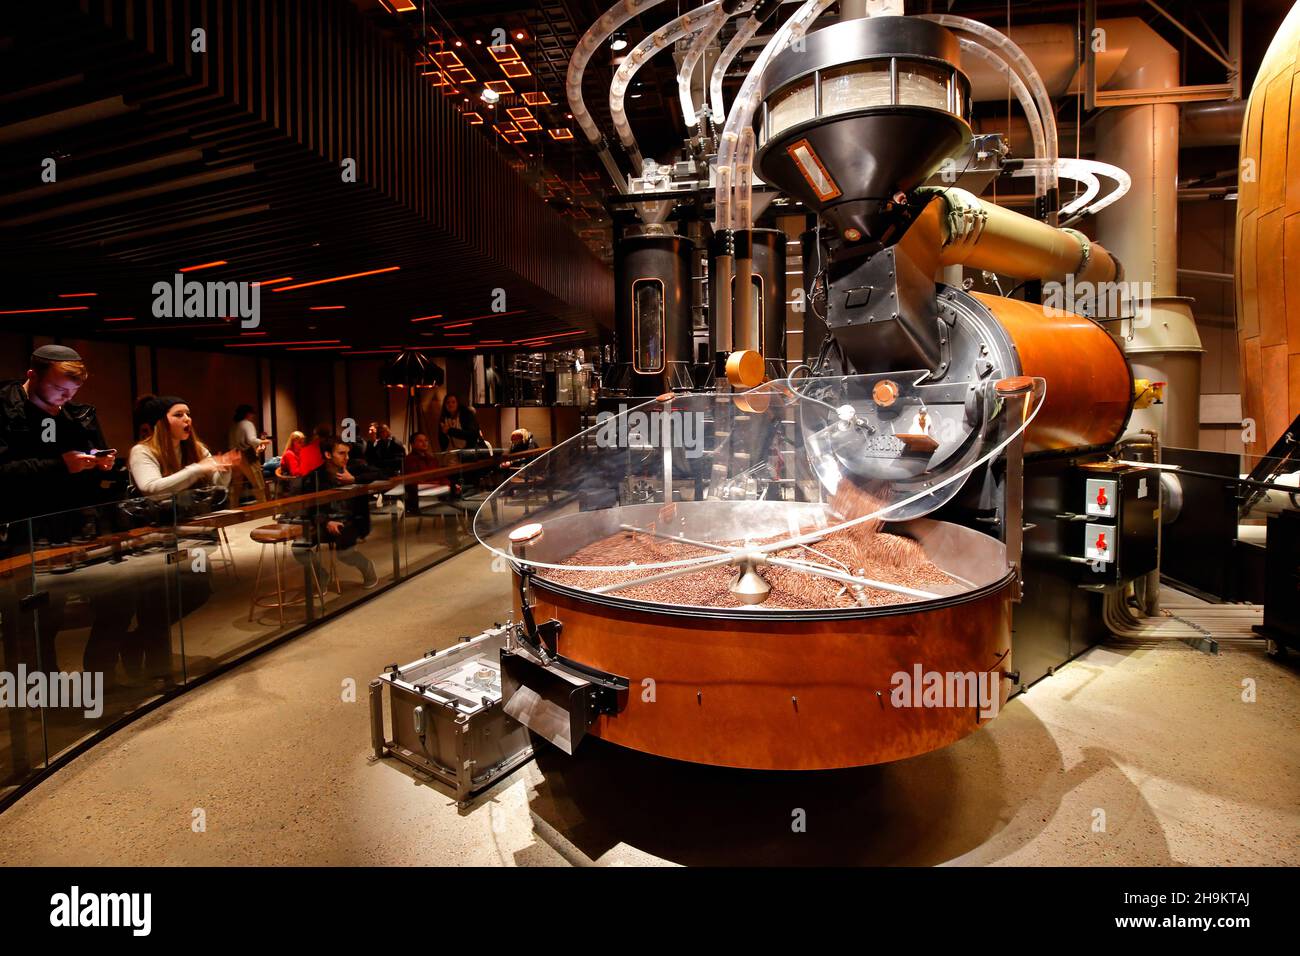 People watch freshly roasted coffee beans pouring from a large Probat roaster located inside Starbucks Reserve Roastery New York. Stock Photo